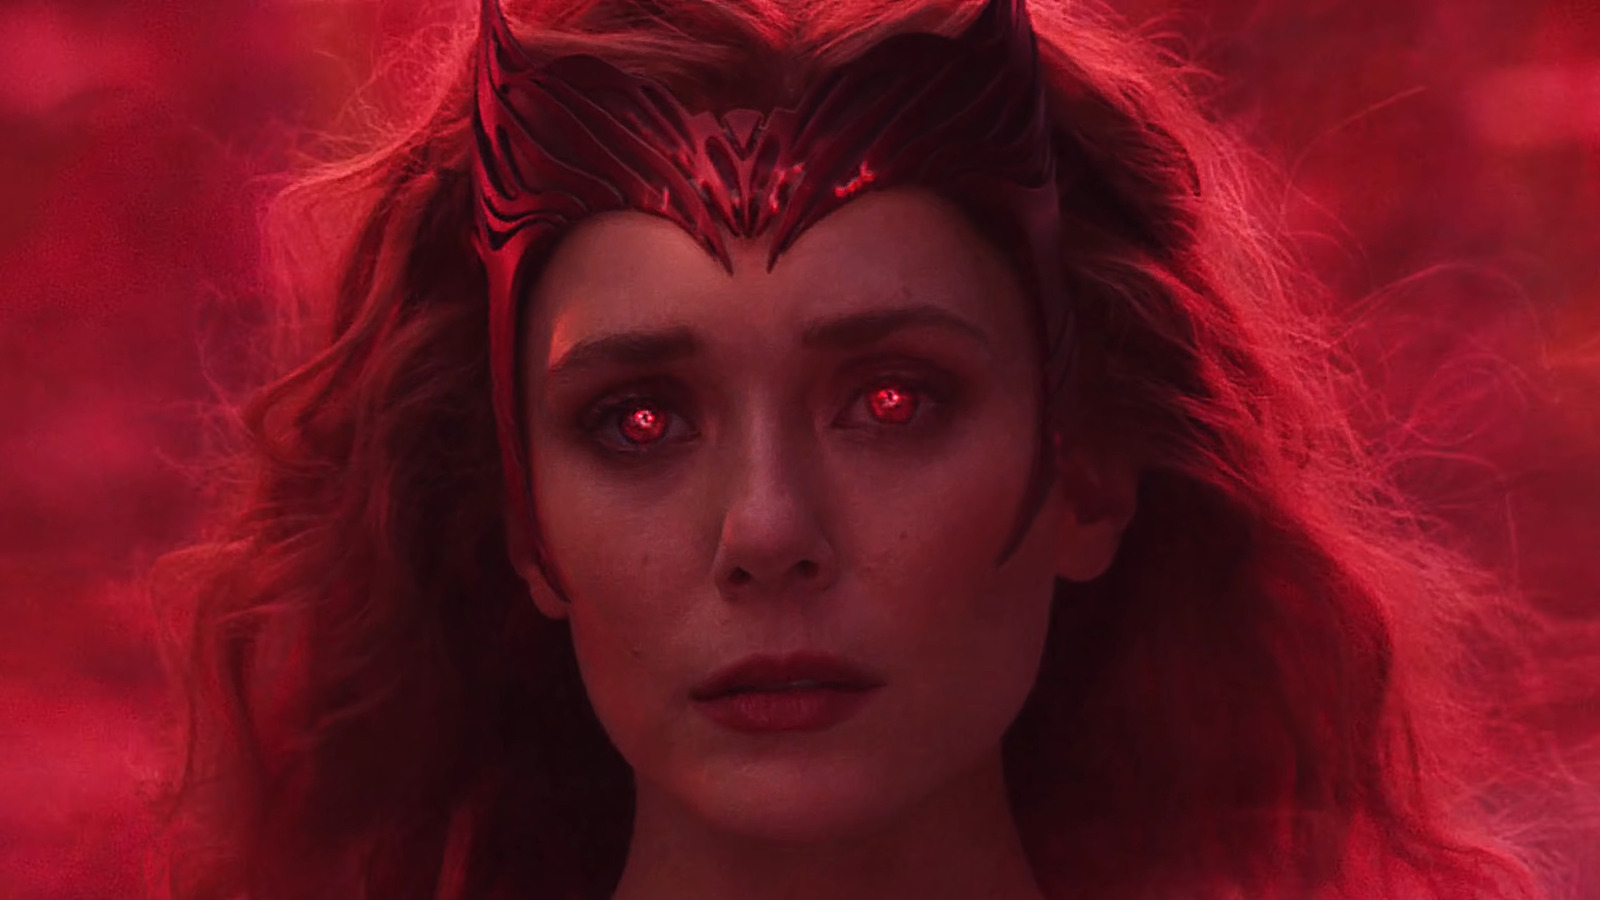 scarlet witch icon  Scarlet witch marvel, Elizabeth olsen scarlet witch, Scarlet  witch